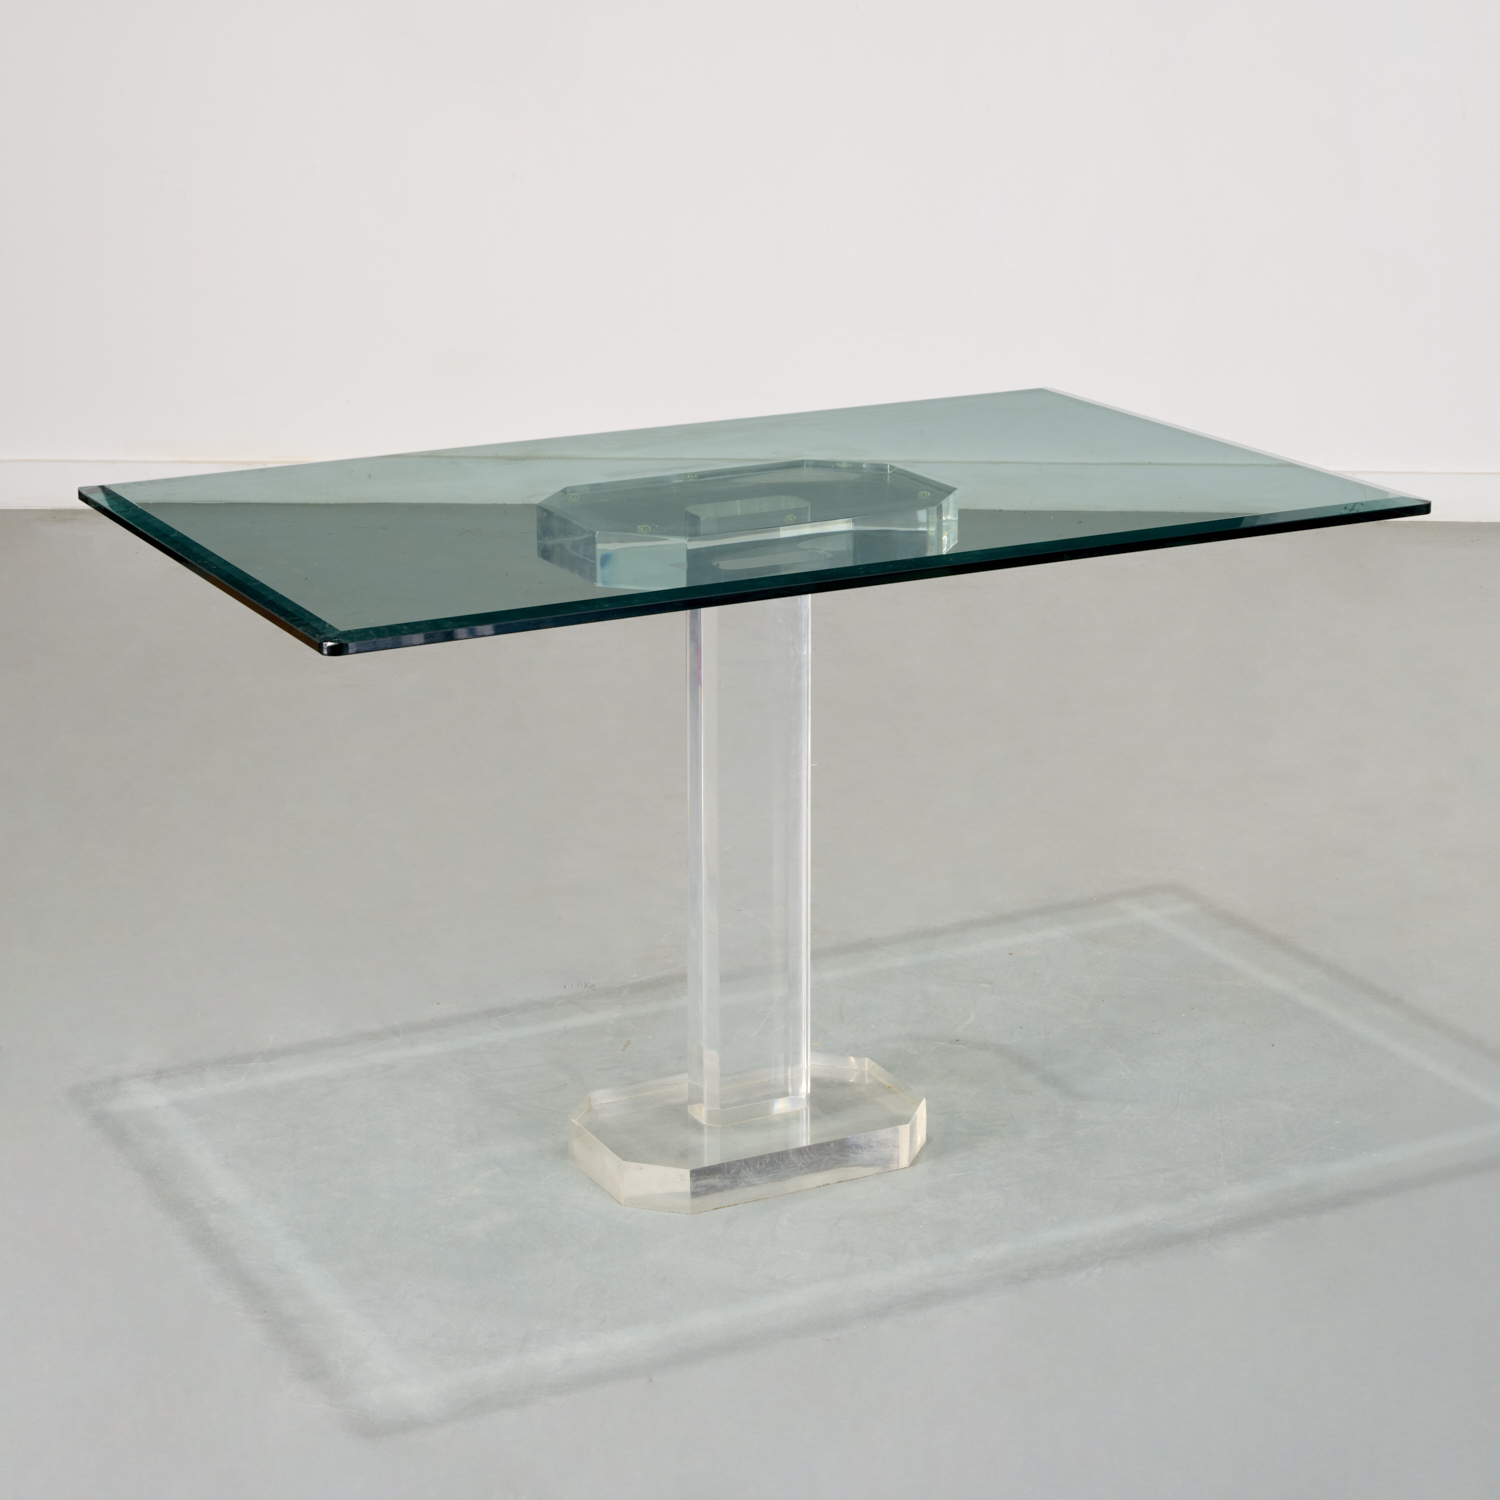 CUSTOM LUCITE AND PLATE GLASS TABLE